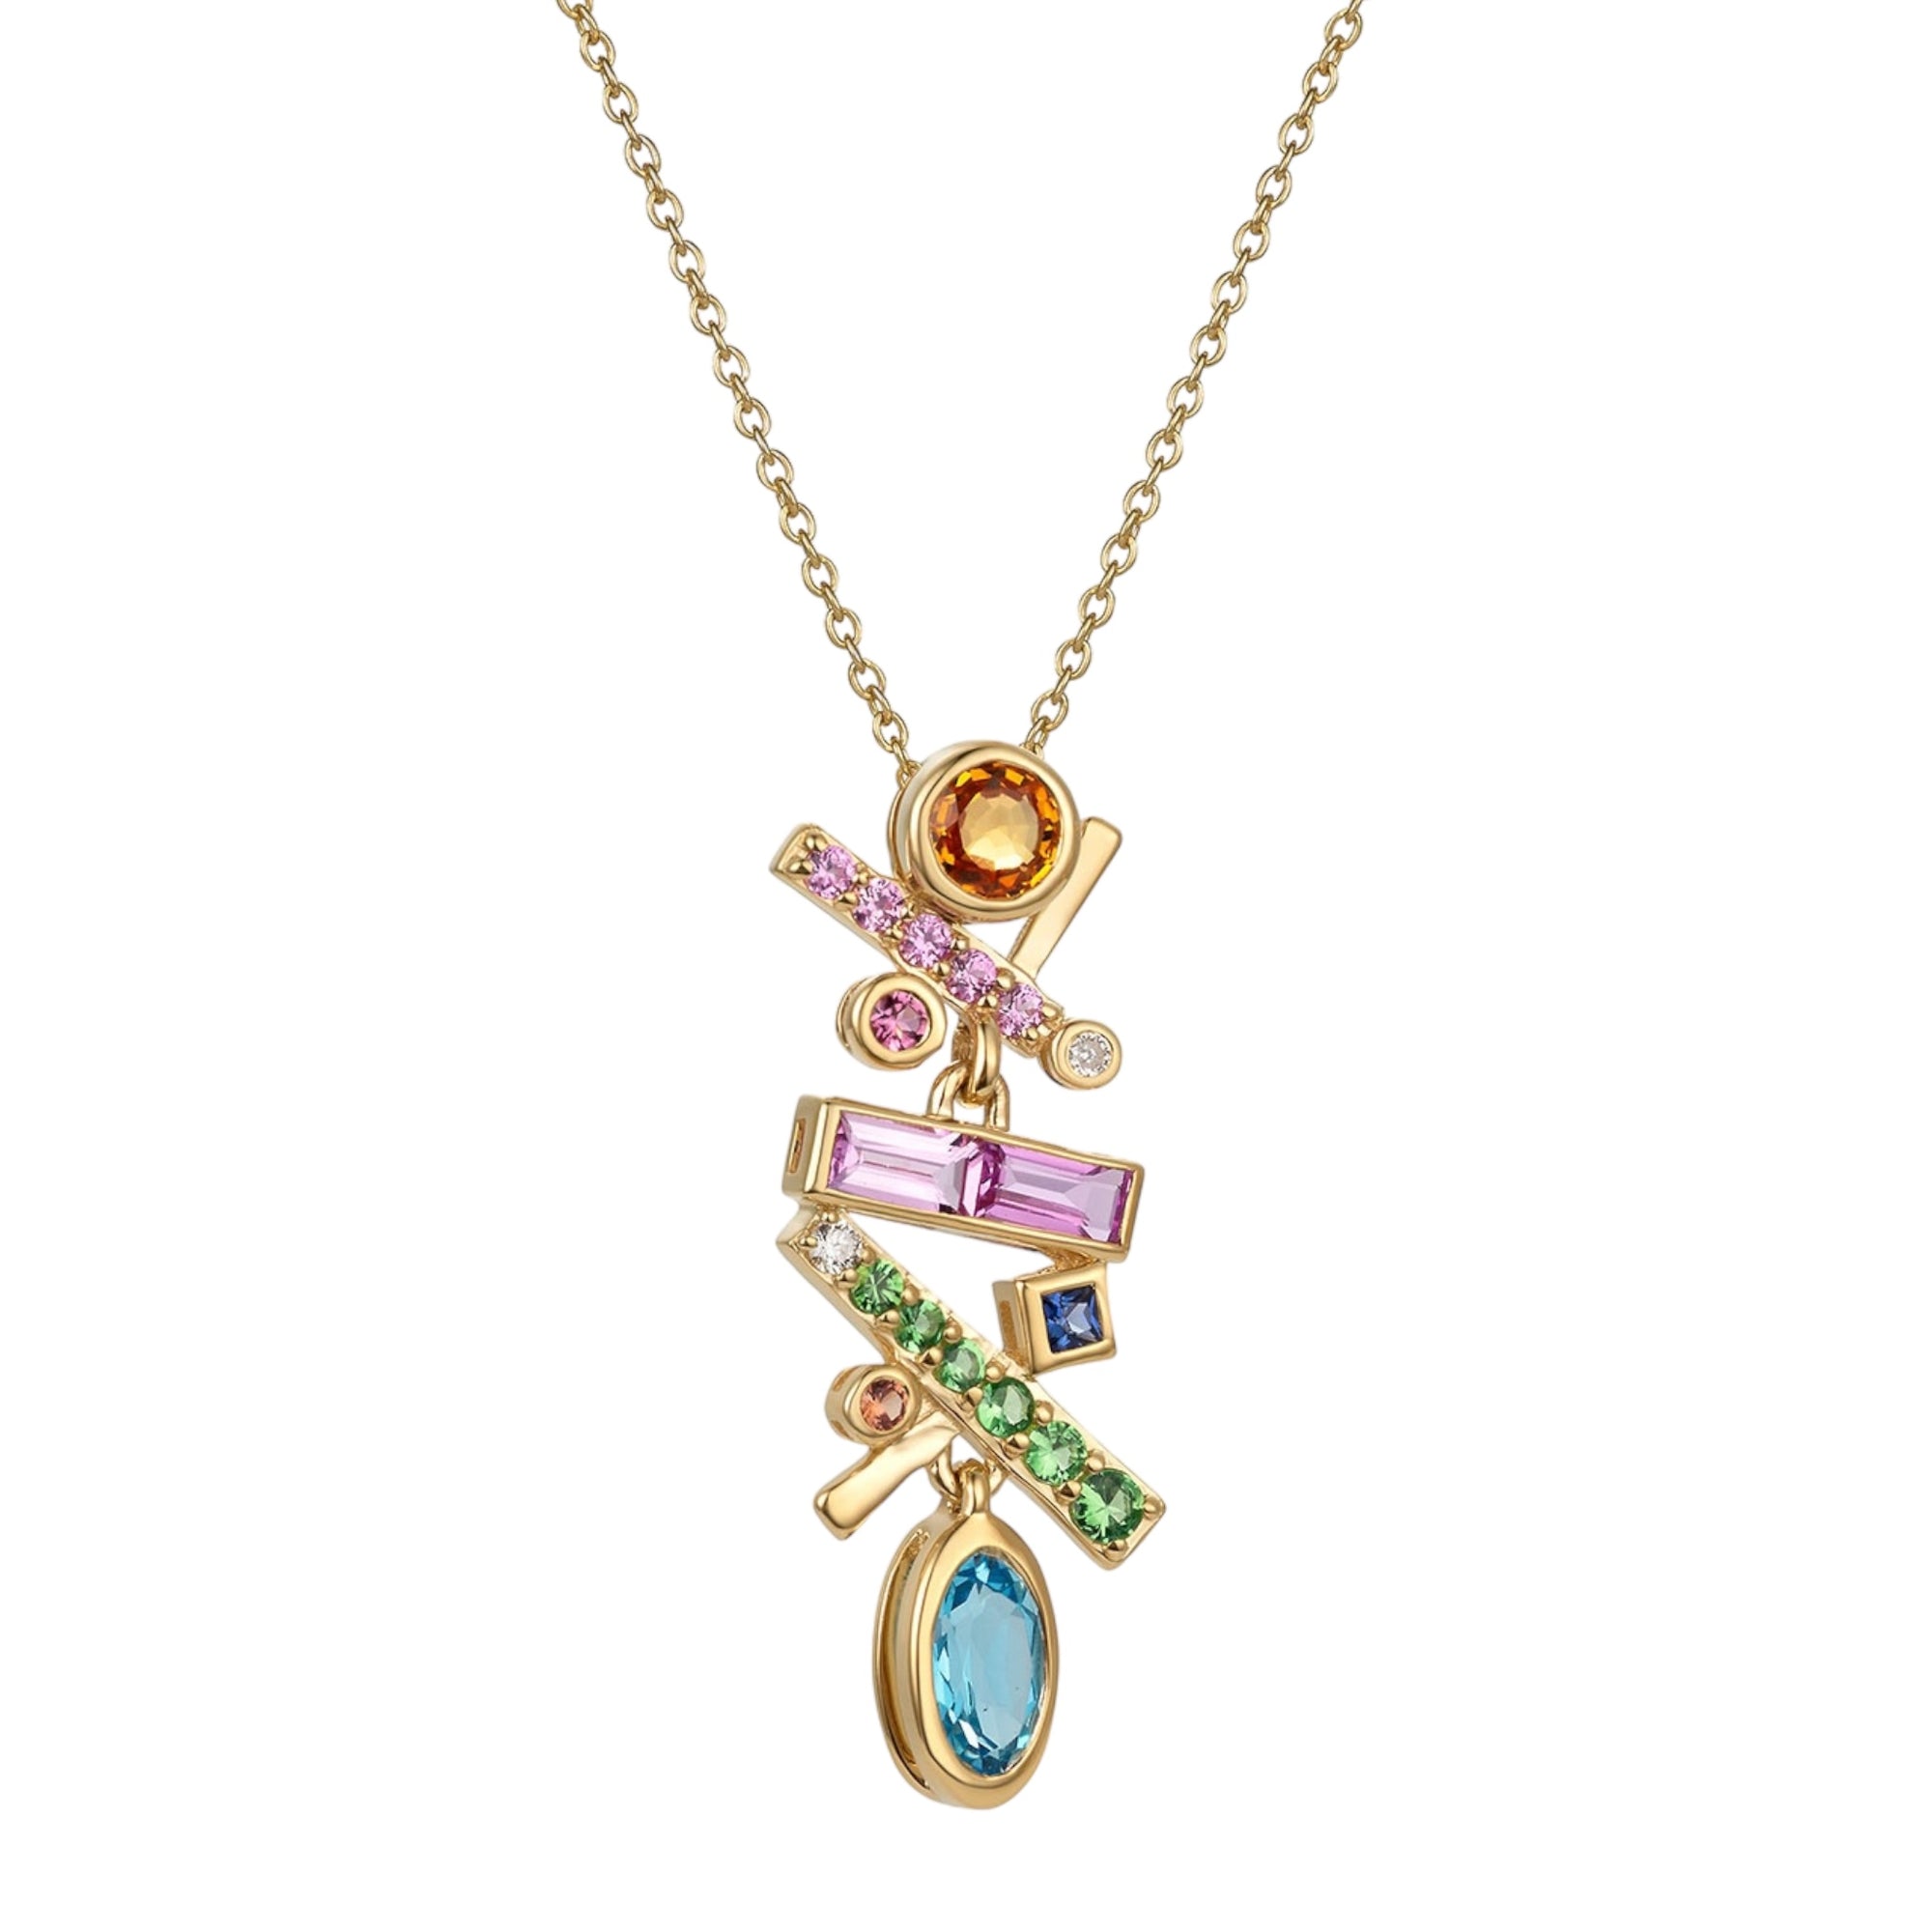 Falling Stars Multi-Color Pendant by Martha Seely available at Talisman Collection Fine Jewelers in El Dorado Hills, CA and online. Stats: This kinetic pendant necklace feature a vibrant cascade of gemstones including sapphires, tsavorites, blue topaz, and pink tourmalines, totaling 1.18 carats. Each gemstone is carefully selected, flawlessly set, and accented with 0.016 cts of sparkling diamonds, making this a truly captivating necklace.